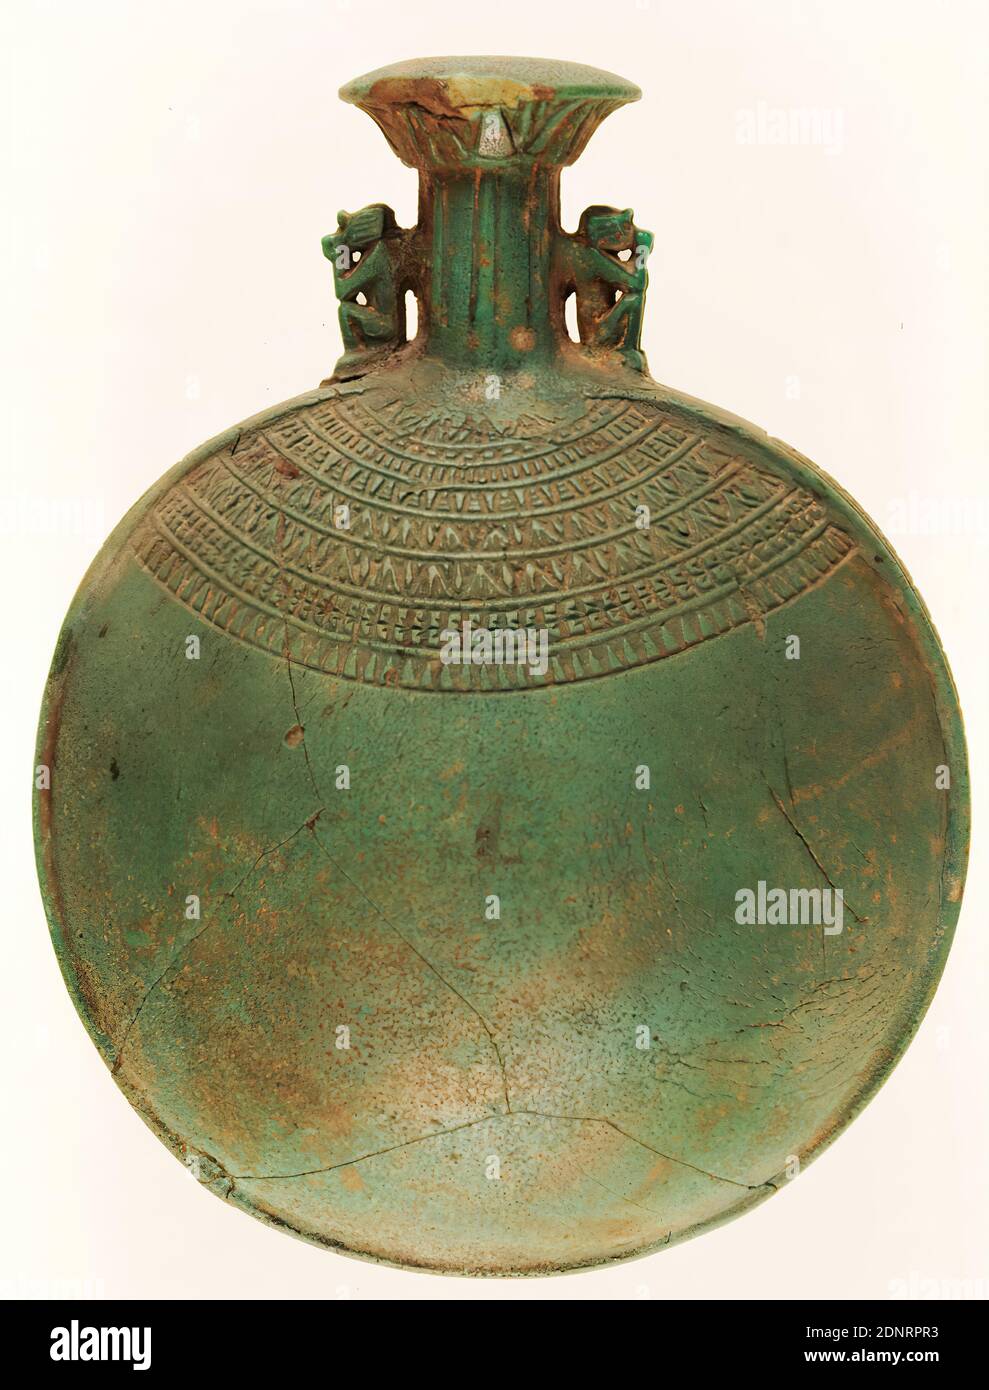 Pilgrim's Bottle (New Year's Bottle), Faience, Faience, Total: Height: 17 cm; Width: 12.5 cm; Depth: 8 cm, Ritual objects and accessories, votive offerings, burial gifts, monkeys, lotus ornament, lotus flower, column, pillar (architecture), antiquity, This form of bottle with a lenticular body and a cylindrical neck is called a pilgrim's bottle. They can be traced in Egypt from the beginning of the New Kingdom from 1530 BC until the Coptic period of the 6th century AD. The equally common designation as New Year's Bottle goes back to the early custom of filling the vessel with perfume Stock Photo